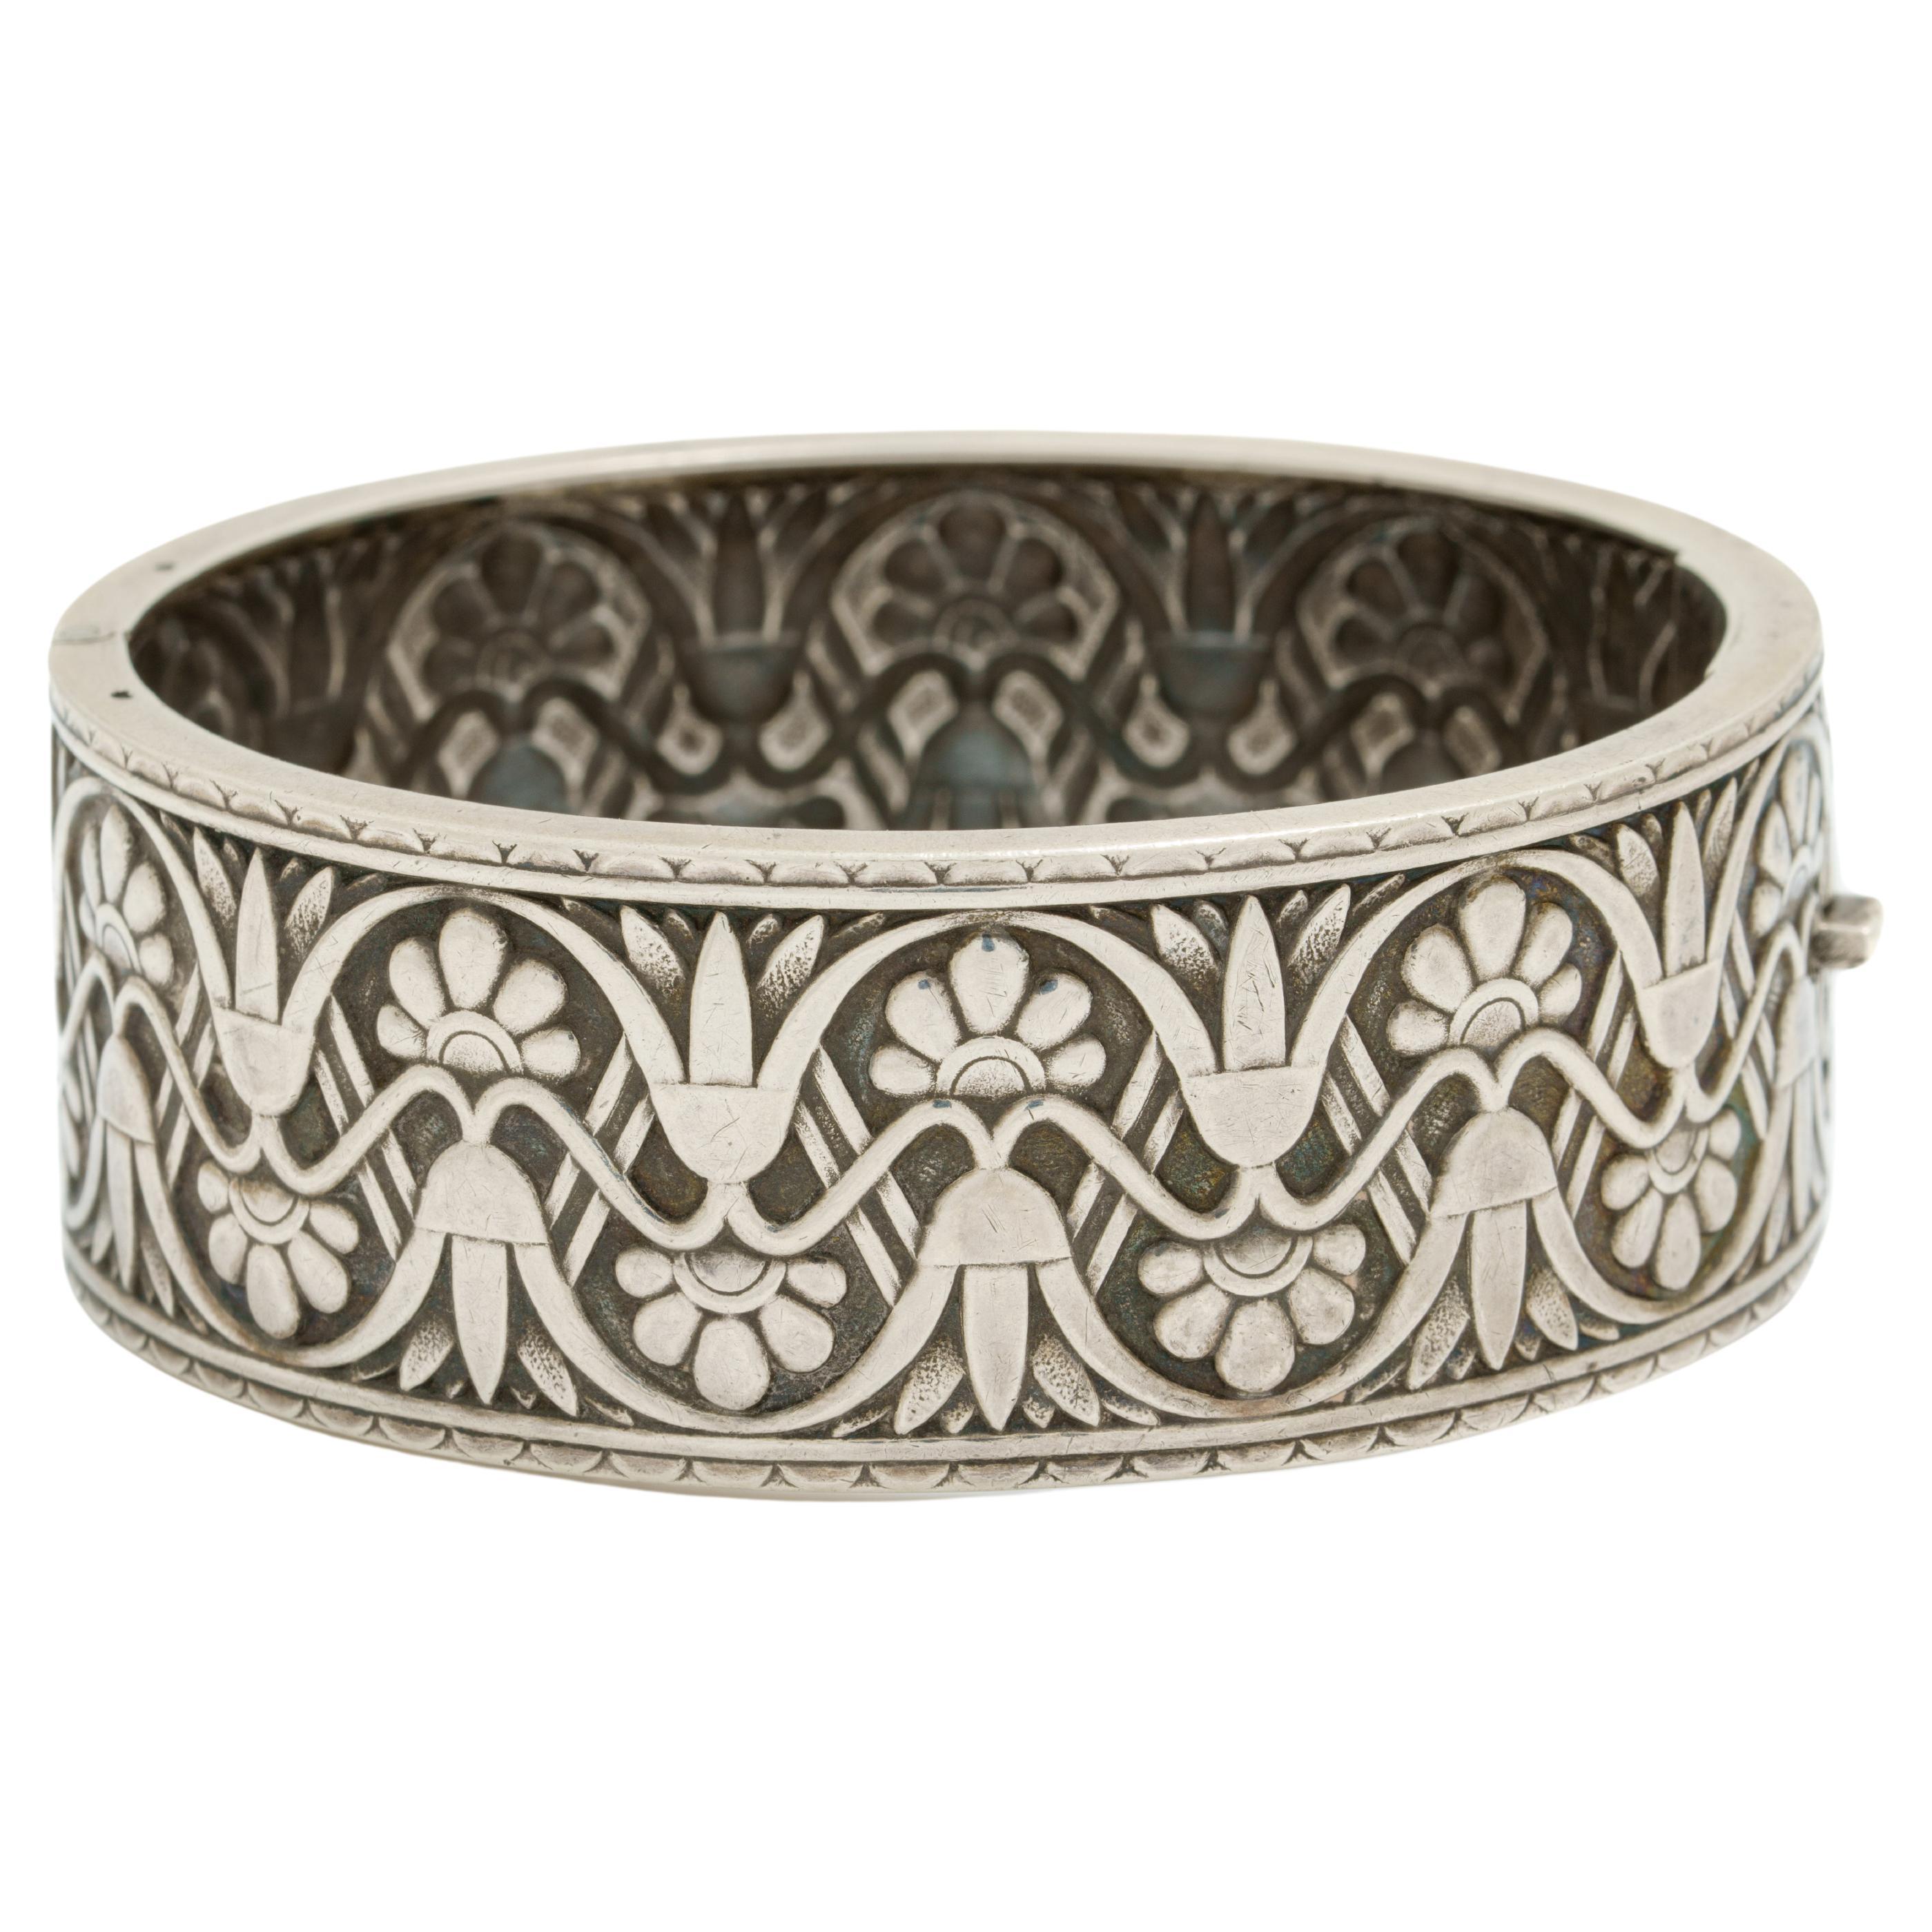 Victorian Etruscan Revival Silver Statement Bangle